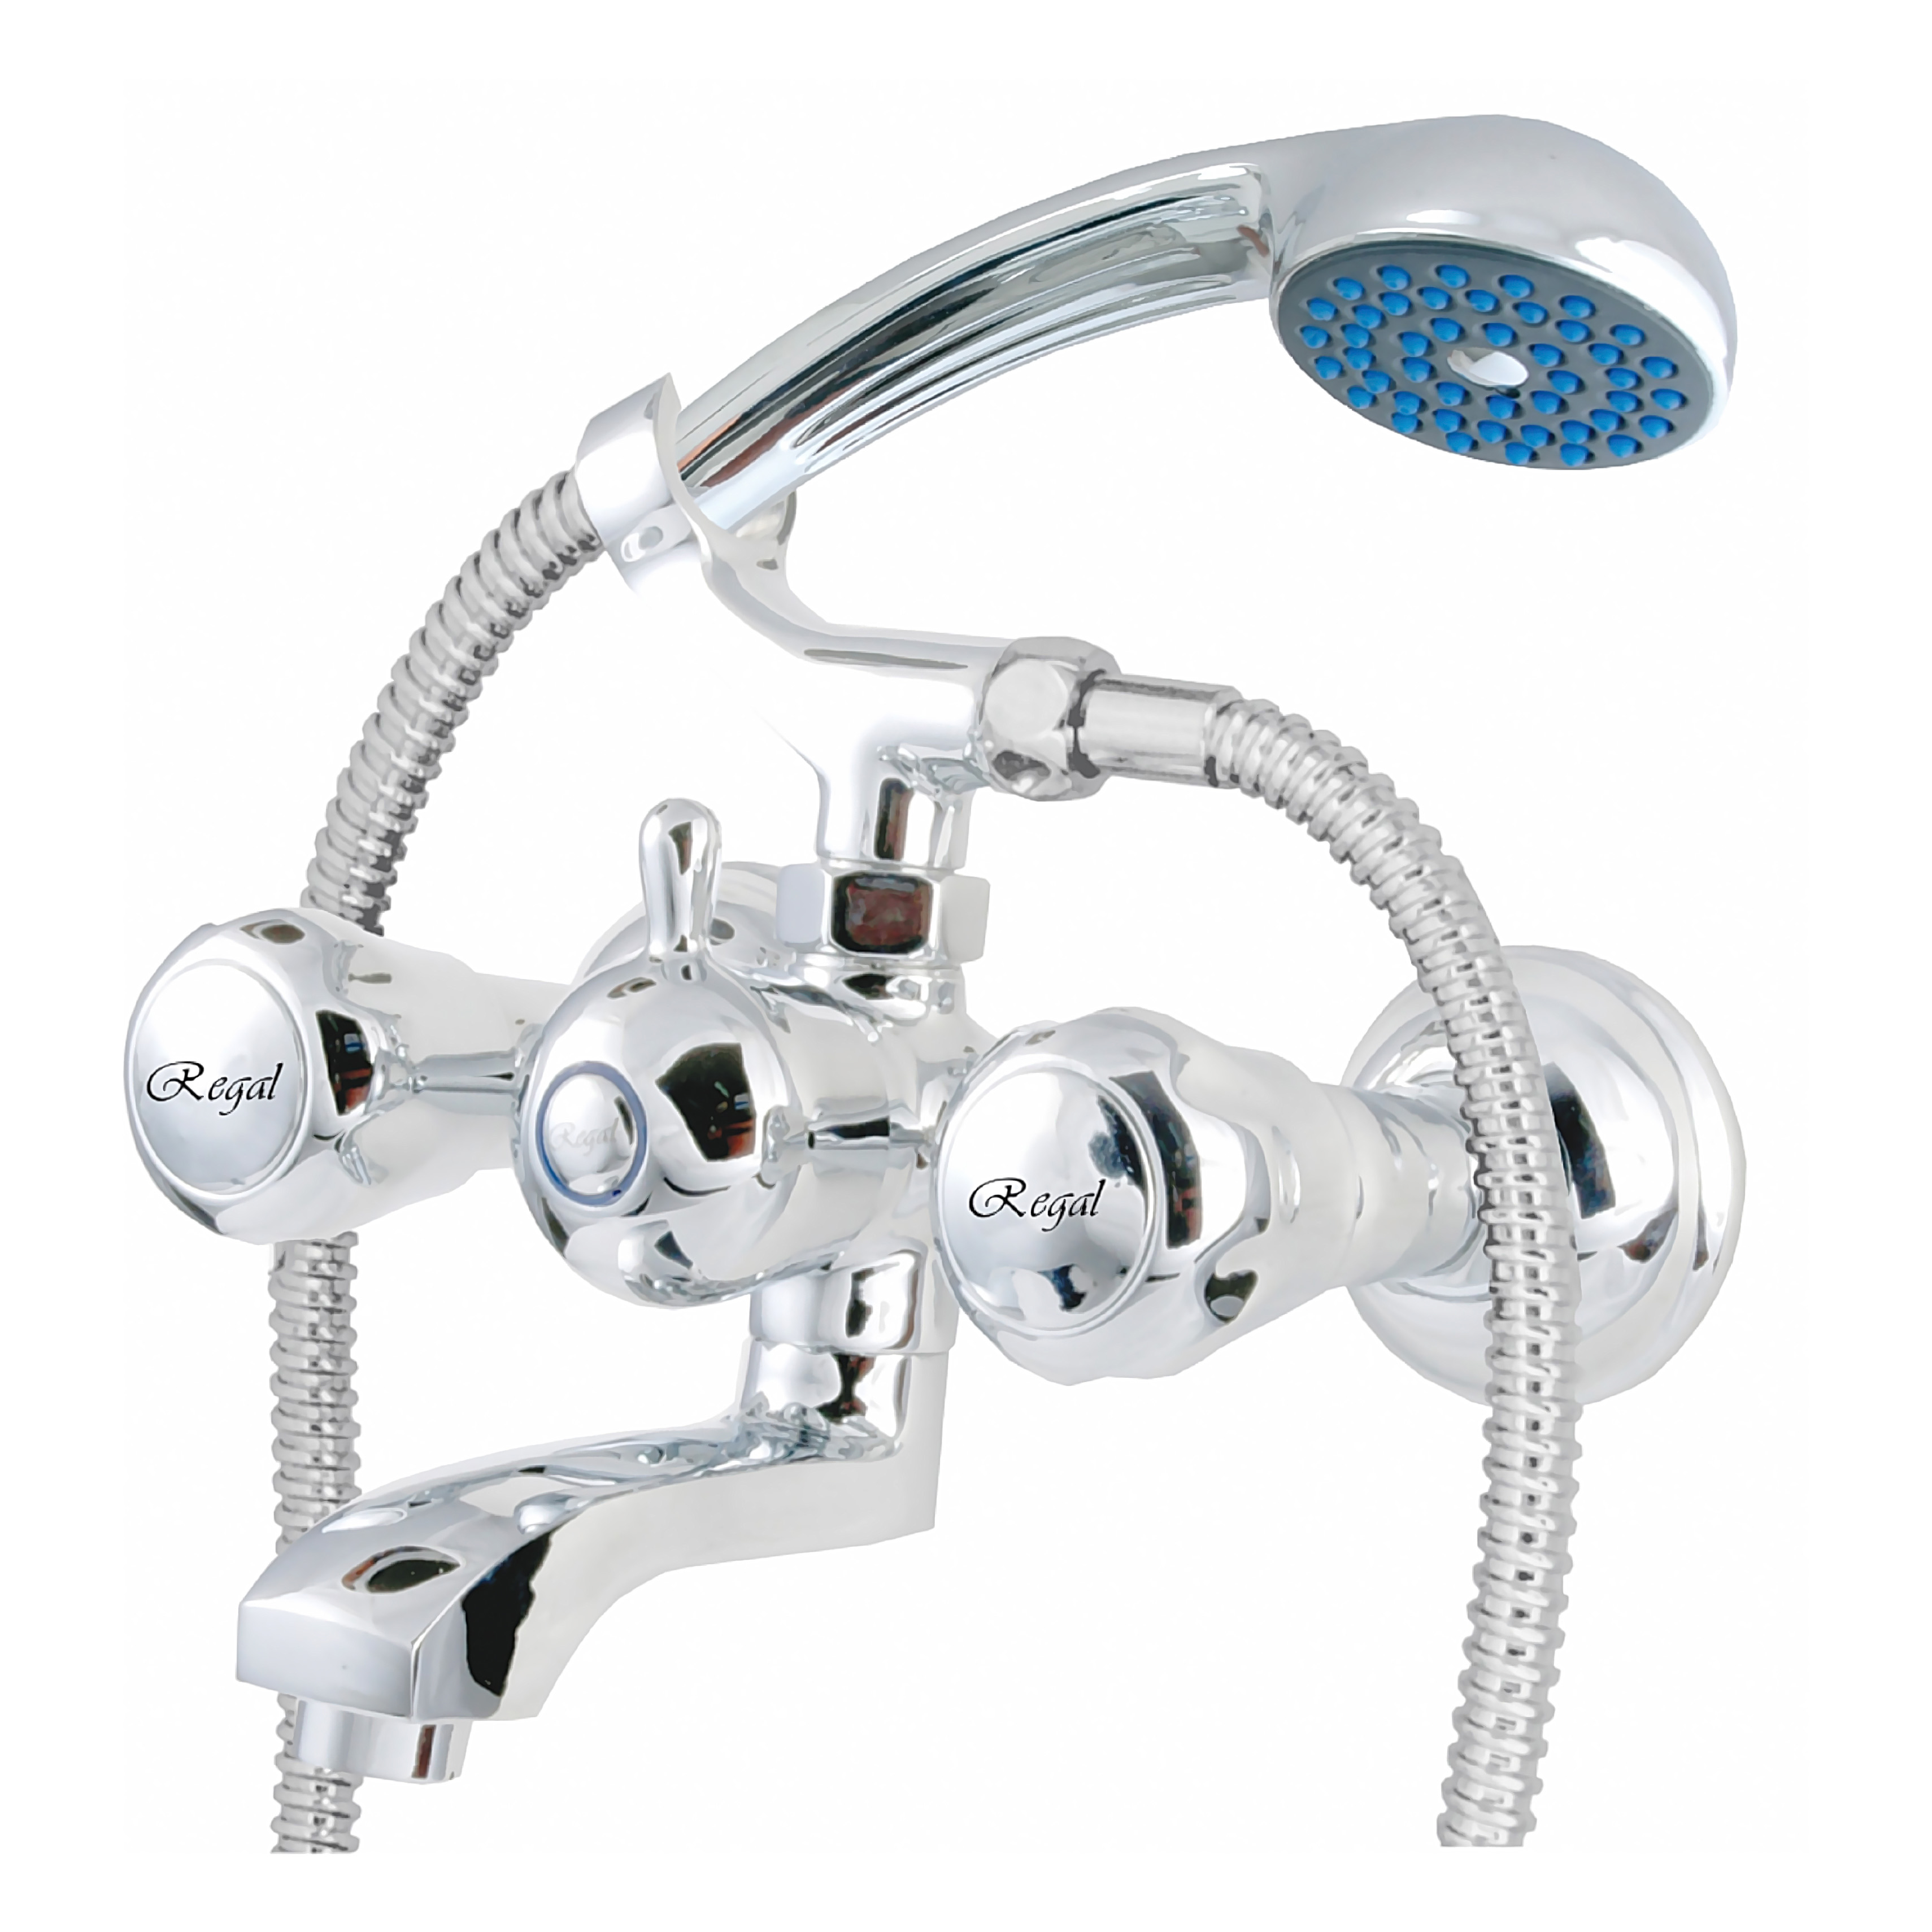 Falco Wall Mixer With Telephonic Shower Arrangement With Crutch Only